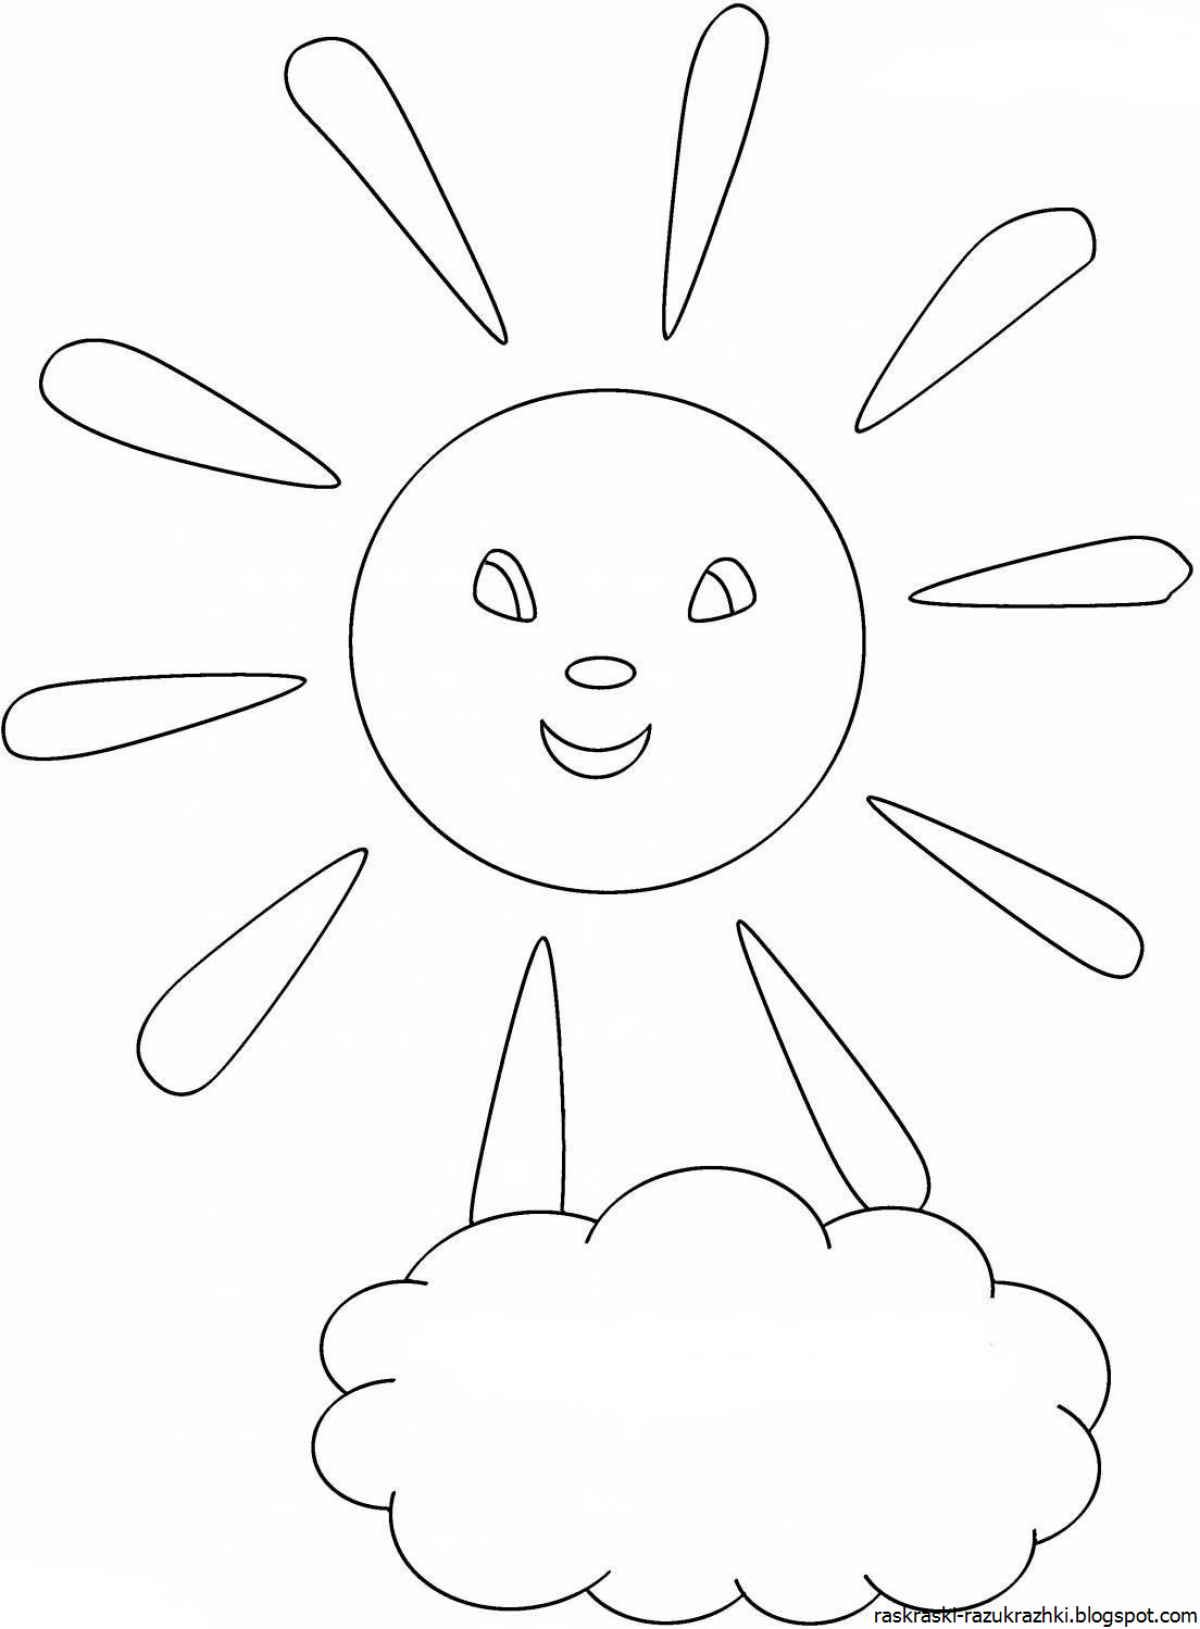 Showy coloring of the sun with a smile